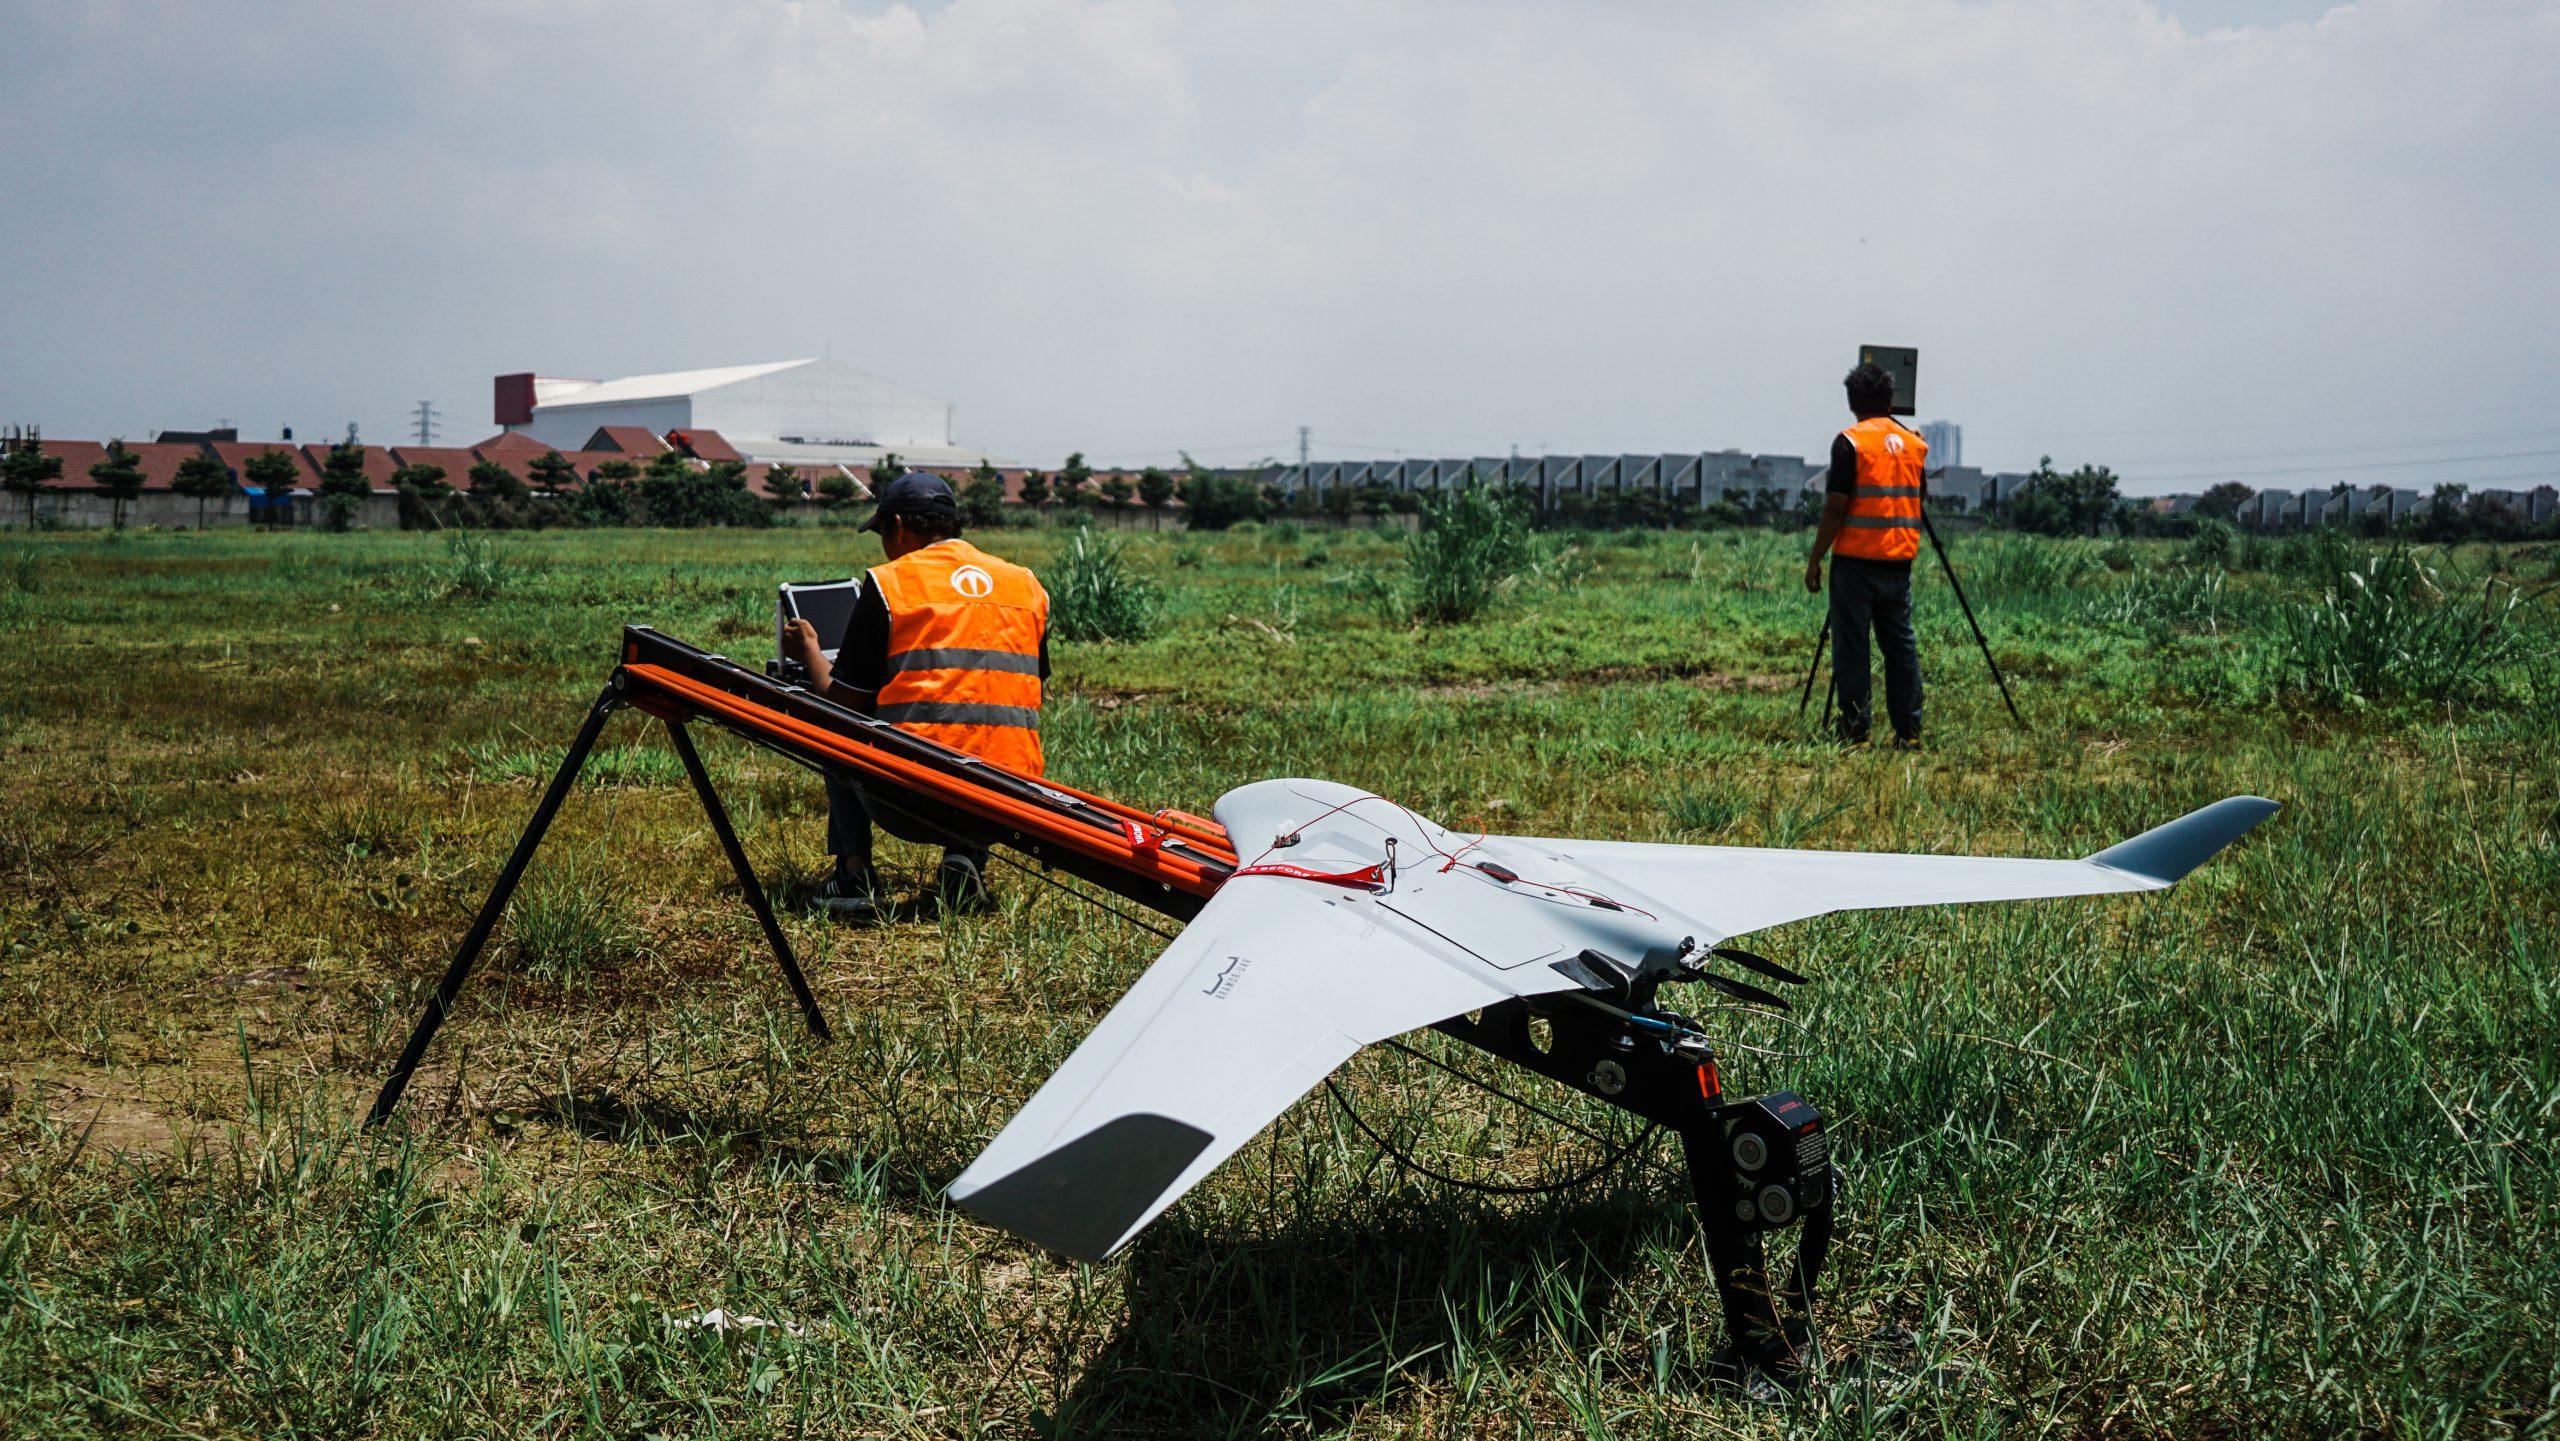 Product Terra Drone Corporation Solidifies South East Asia Presence in Malaysia image